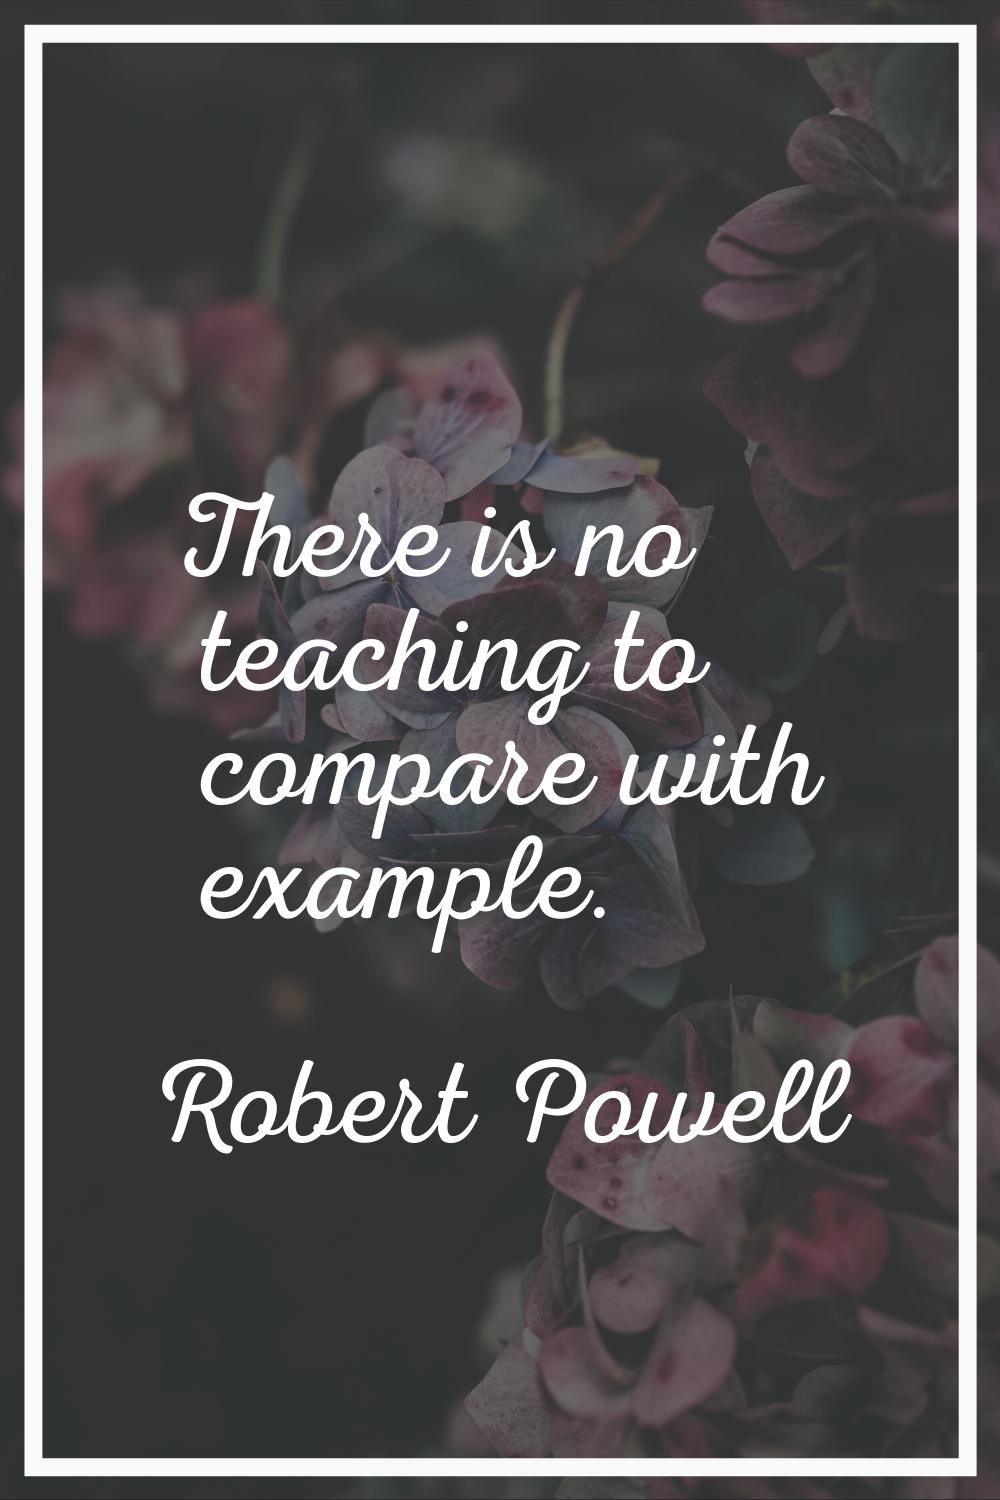 There is no teaching to compare with example.